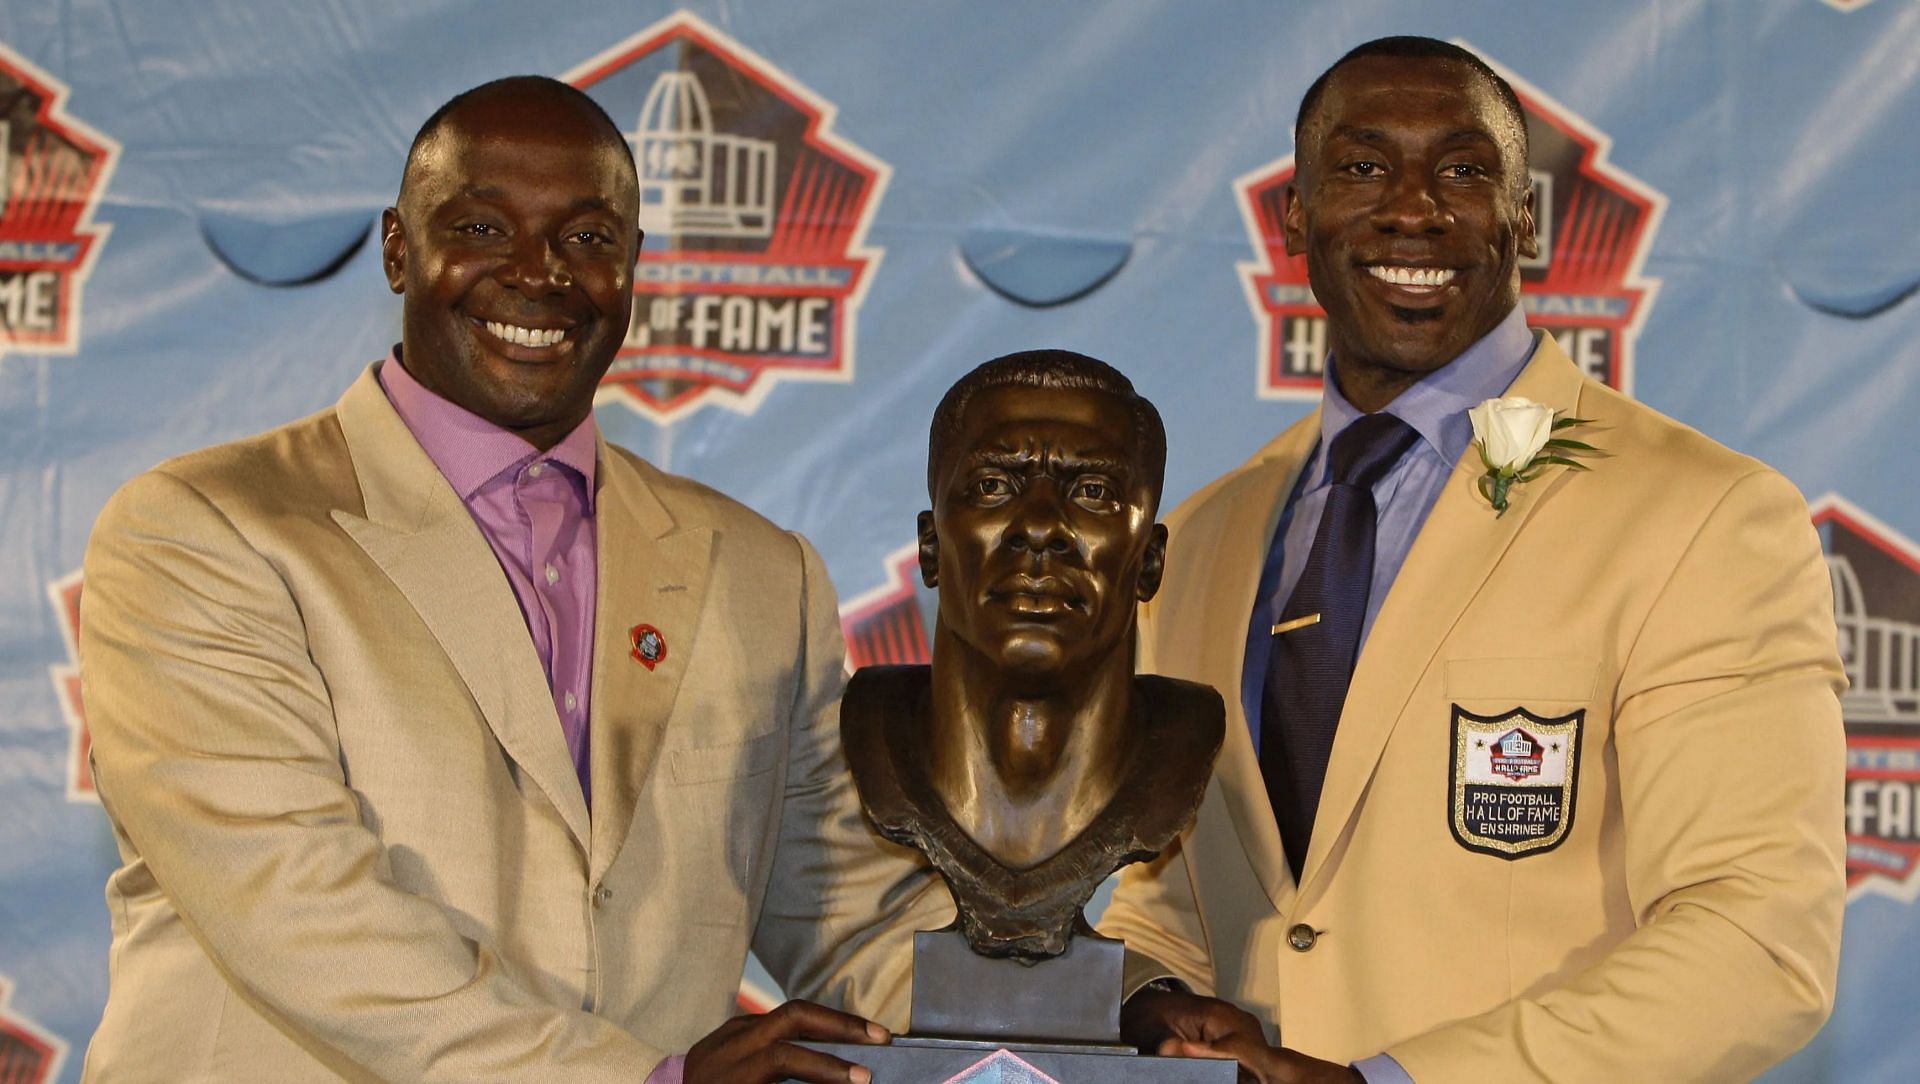 Sterling Sharpe (r) with his brother Shannon Shannon (l) at his HOF ceremony in 2011. Source: USA Today